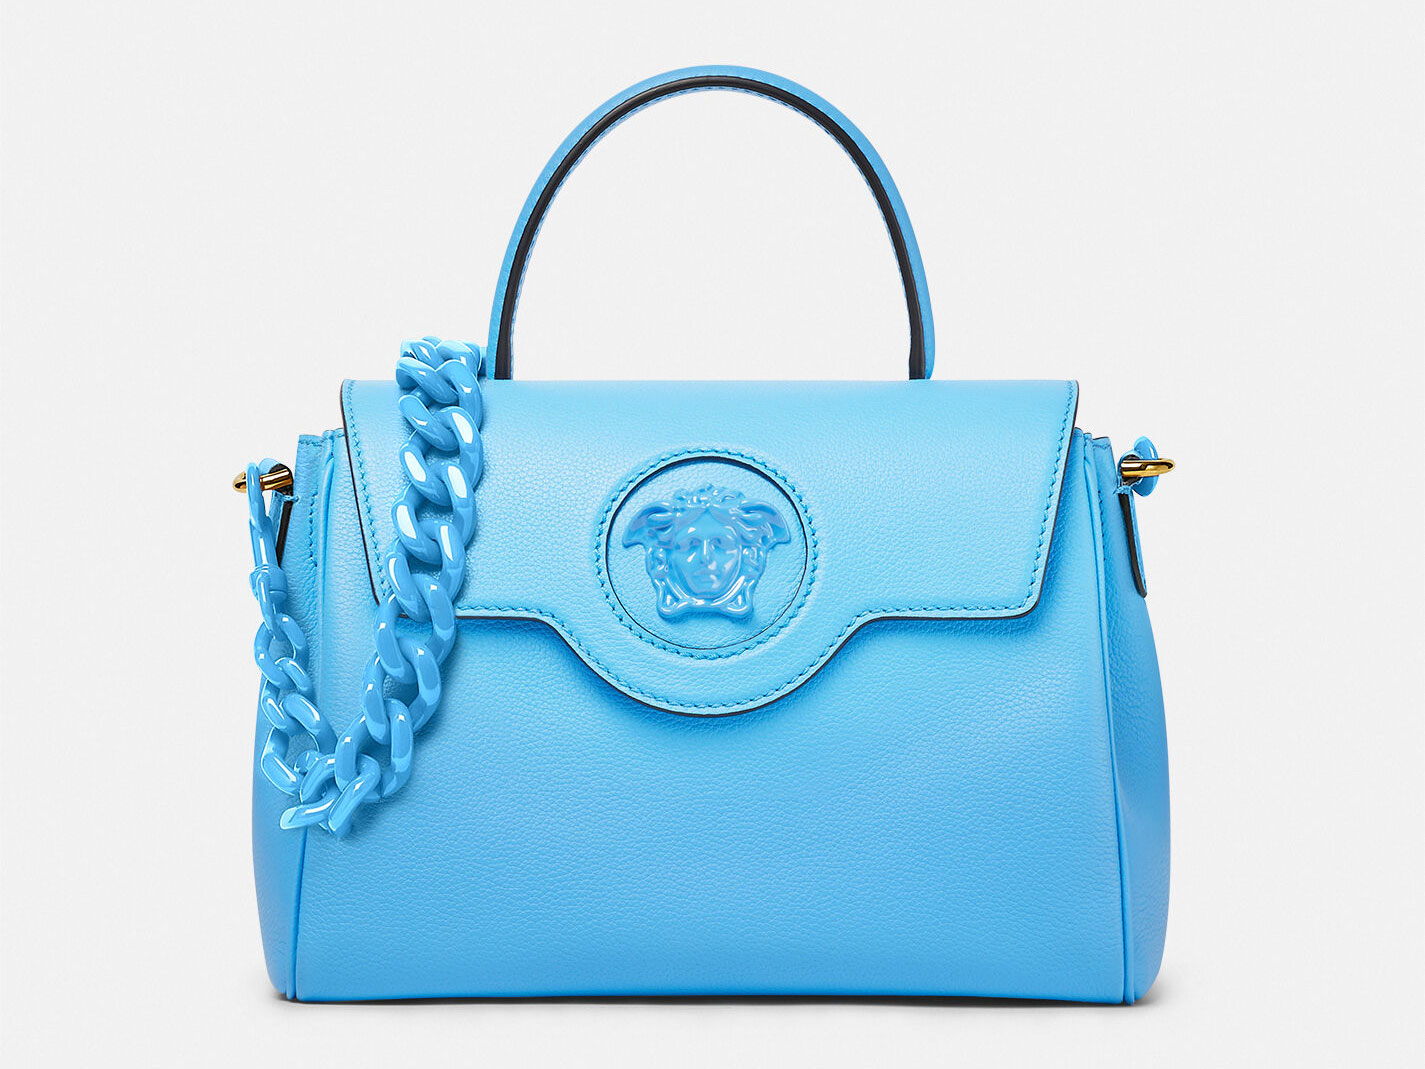 Versace Bag La Medusa Review + 5 Ways to Style This Runway Bag - Glamour  and Gains